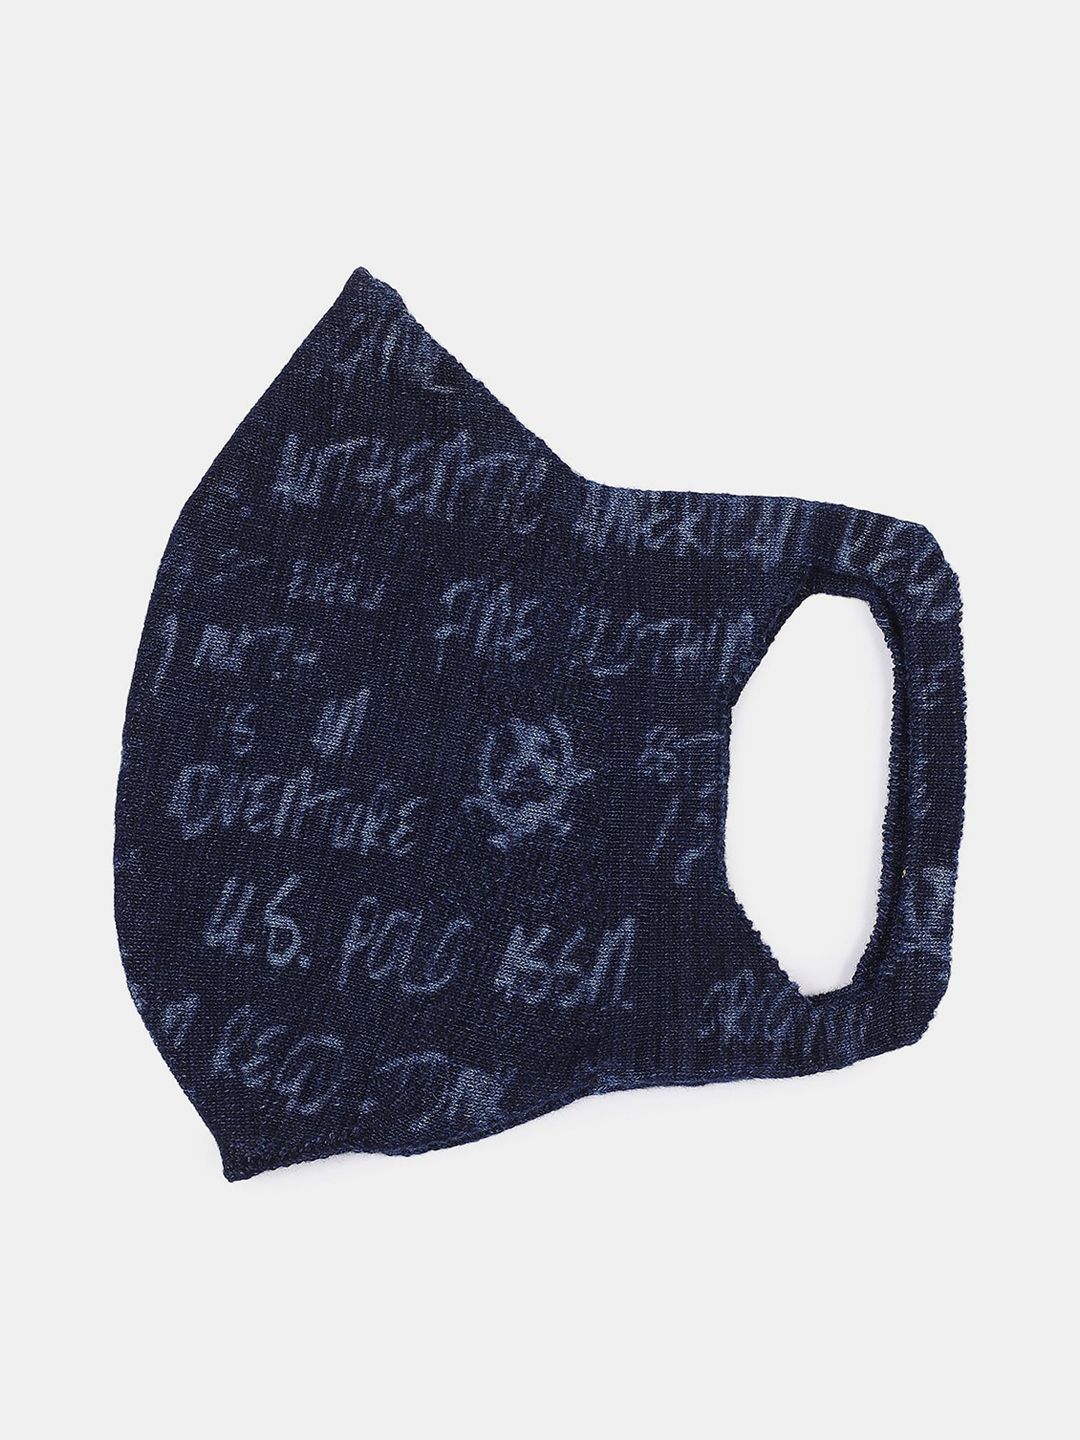 U.S. Polo Assn. Blue Printed Cotton Anti-Microbial  Mask Price in India